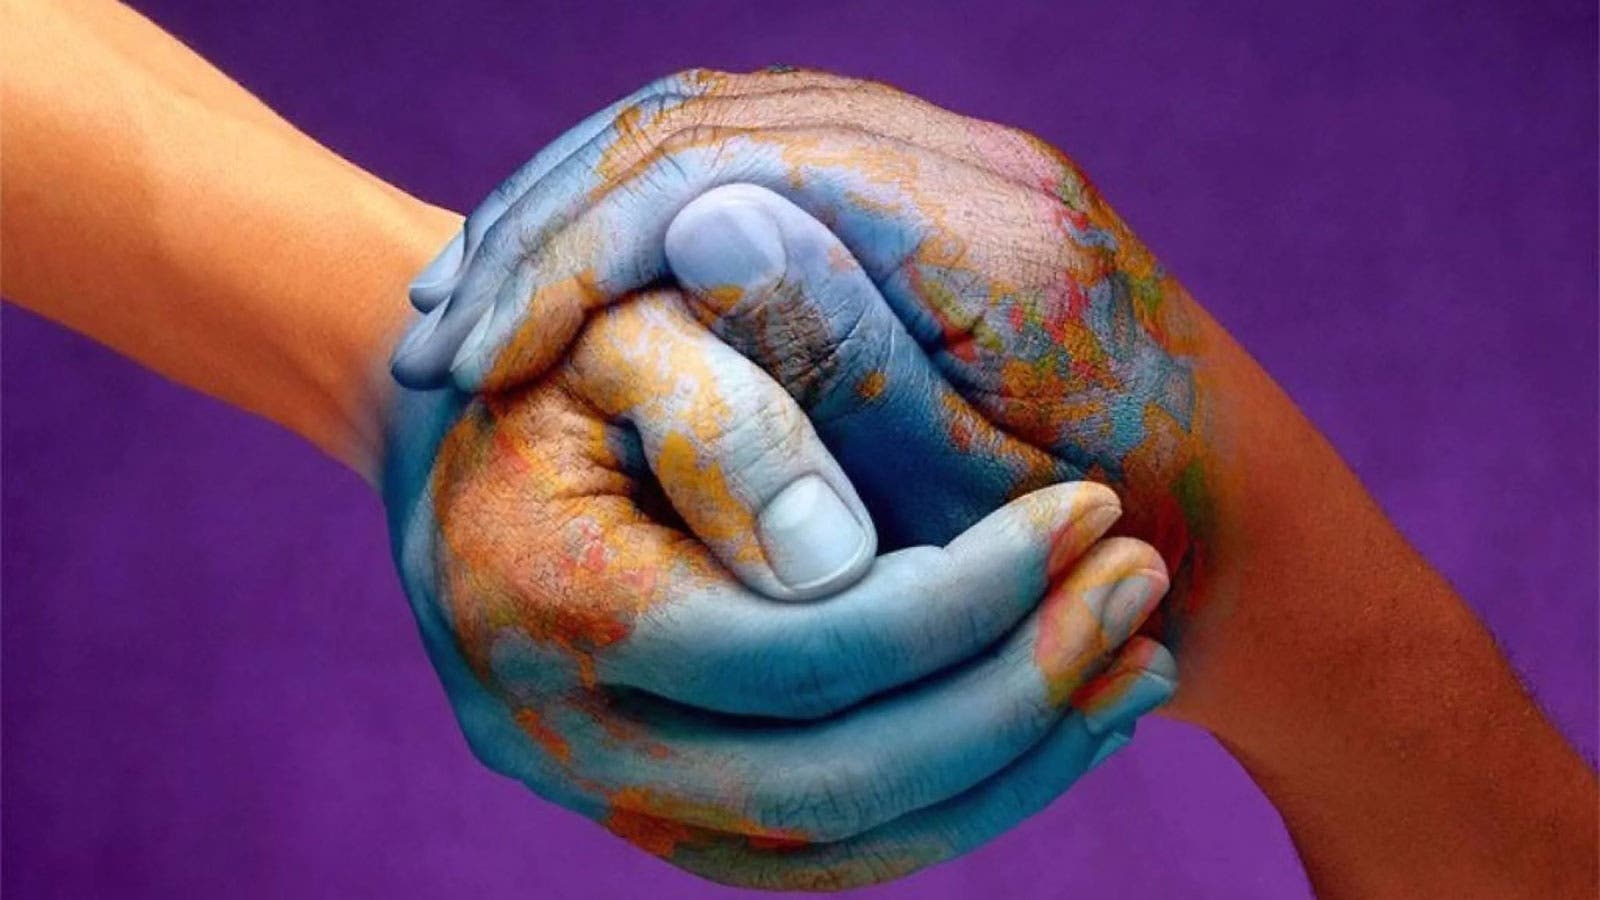 Hands clasped together in shape of a globe